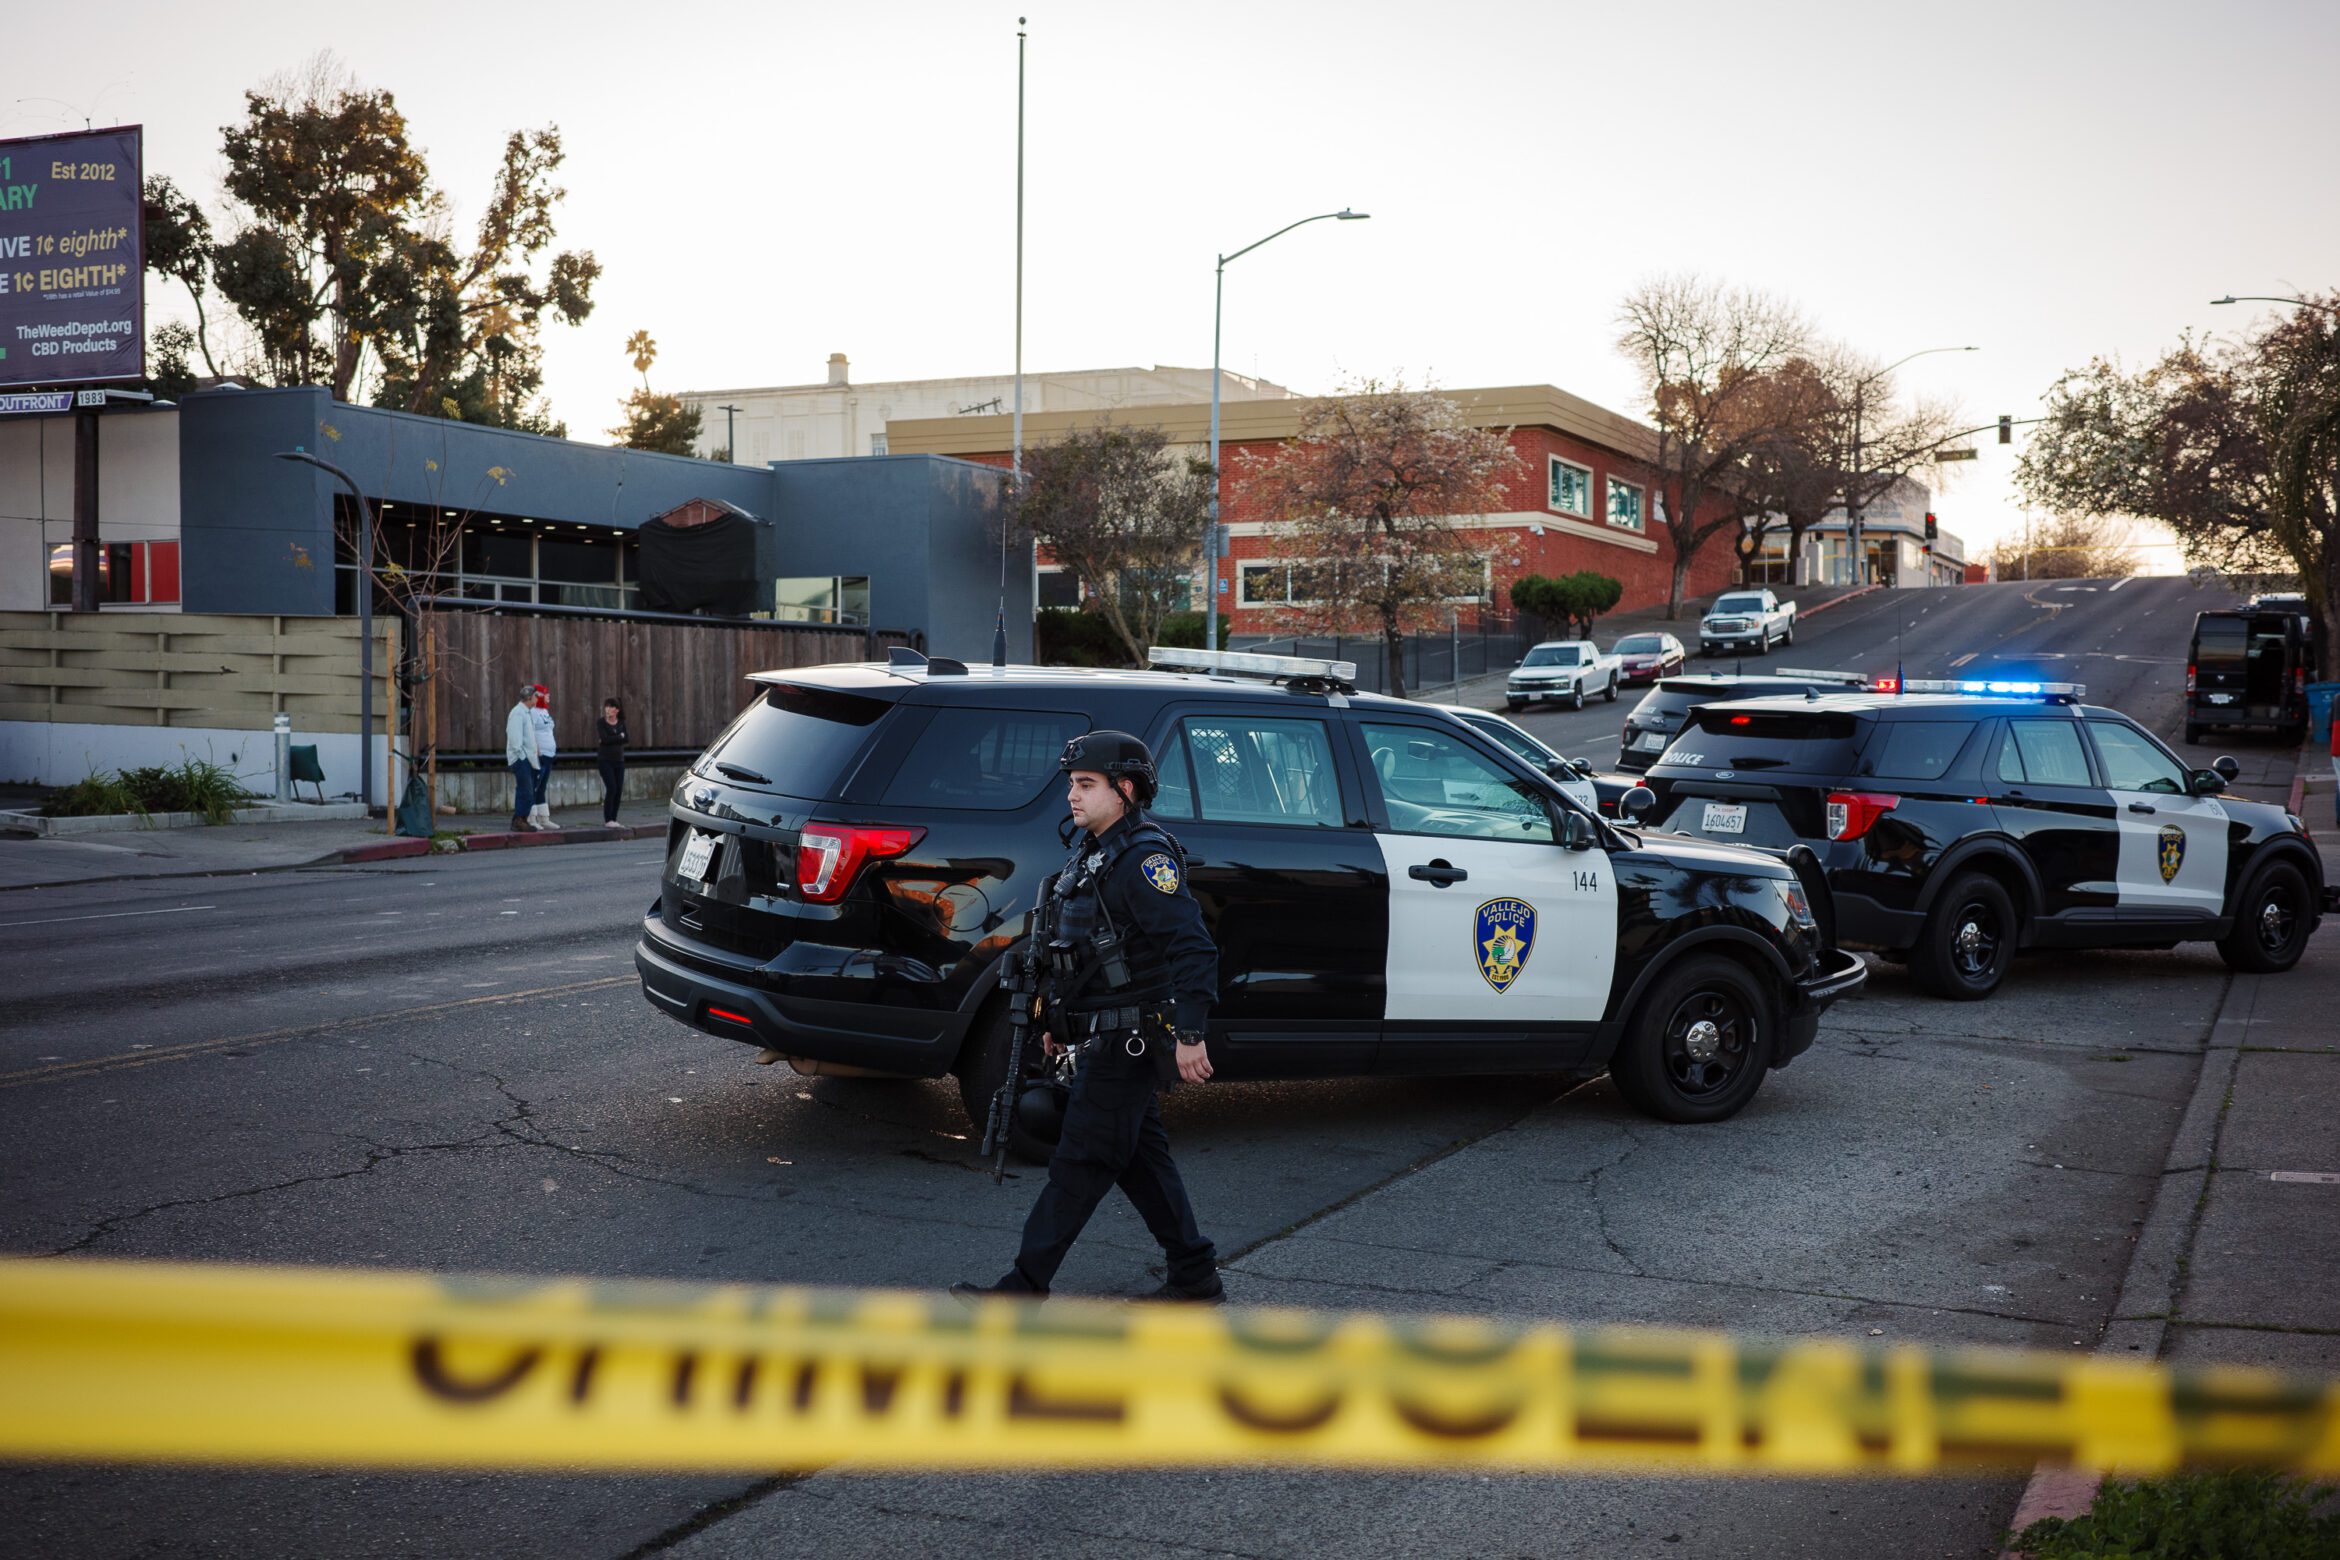 A Vallejo police officer wearing a helmet and carrying a rifle walks past police SUVs as the sun sets in Vallejo, California. Crime scene tape can be seen in the foreground.